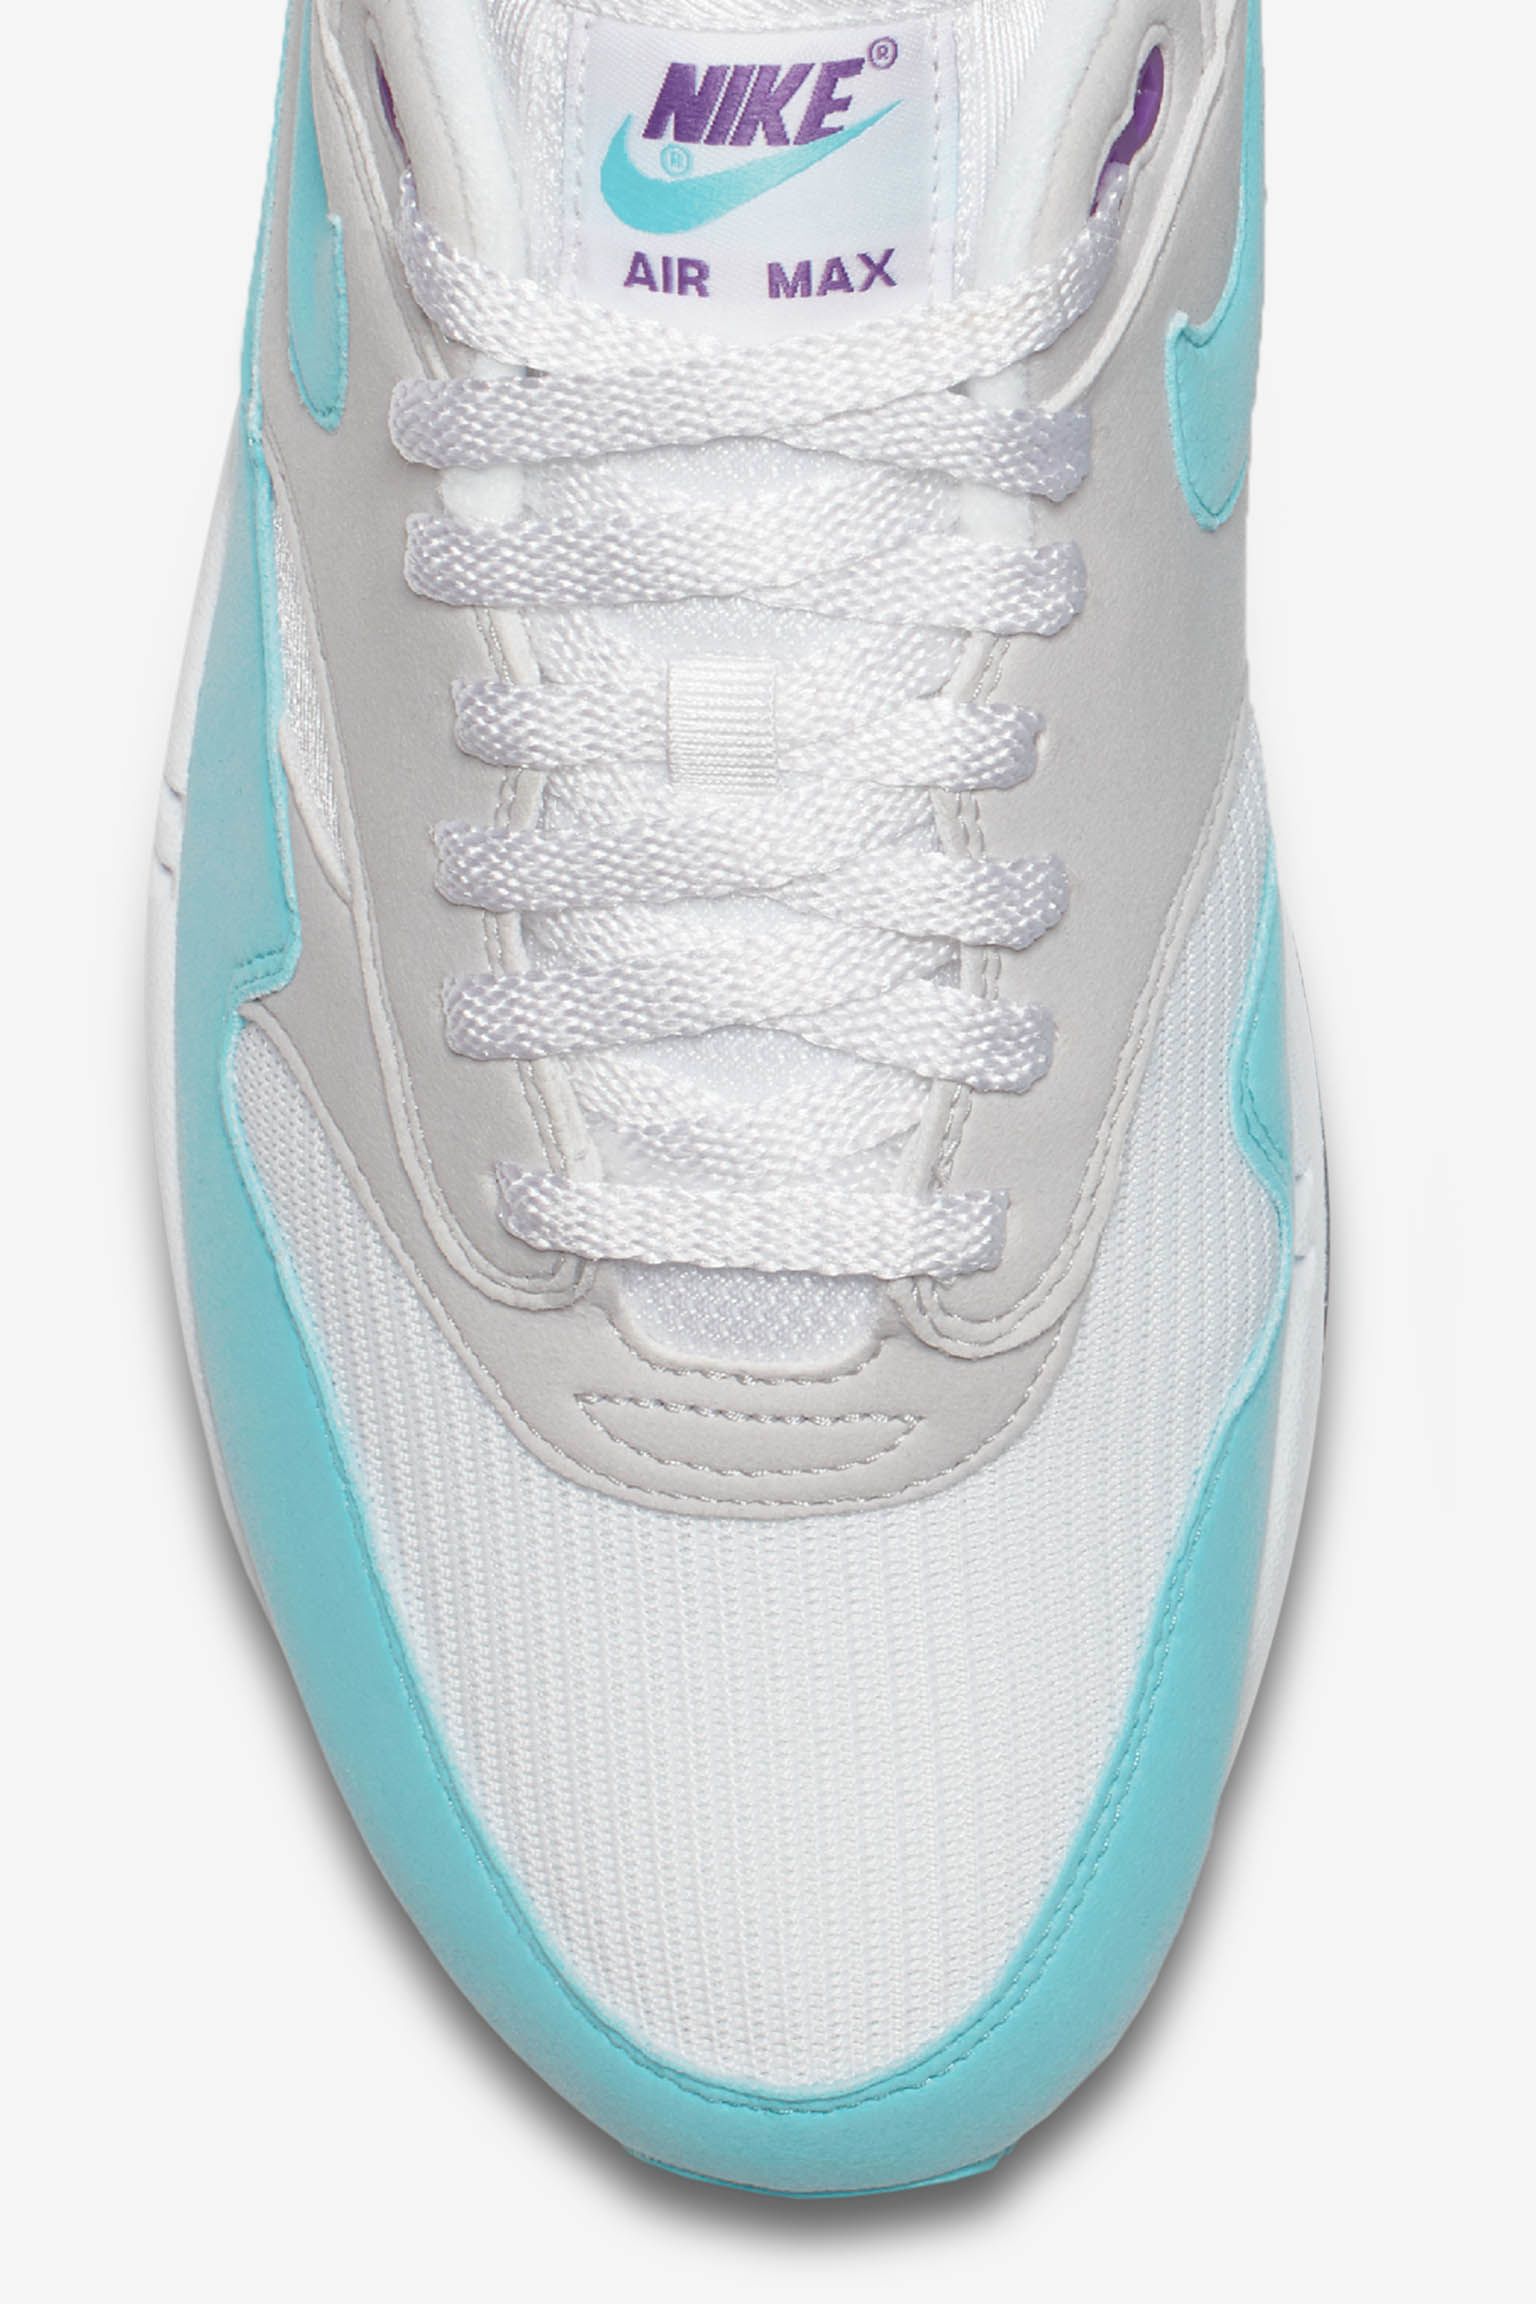 Nike Air Max 1 Anniversary 'White & Aqua' Release Date. Nike SNKRS اي لاف يو تو